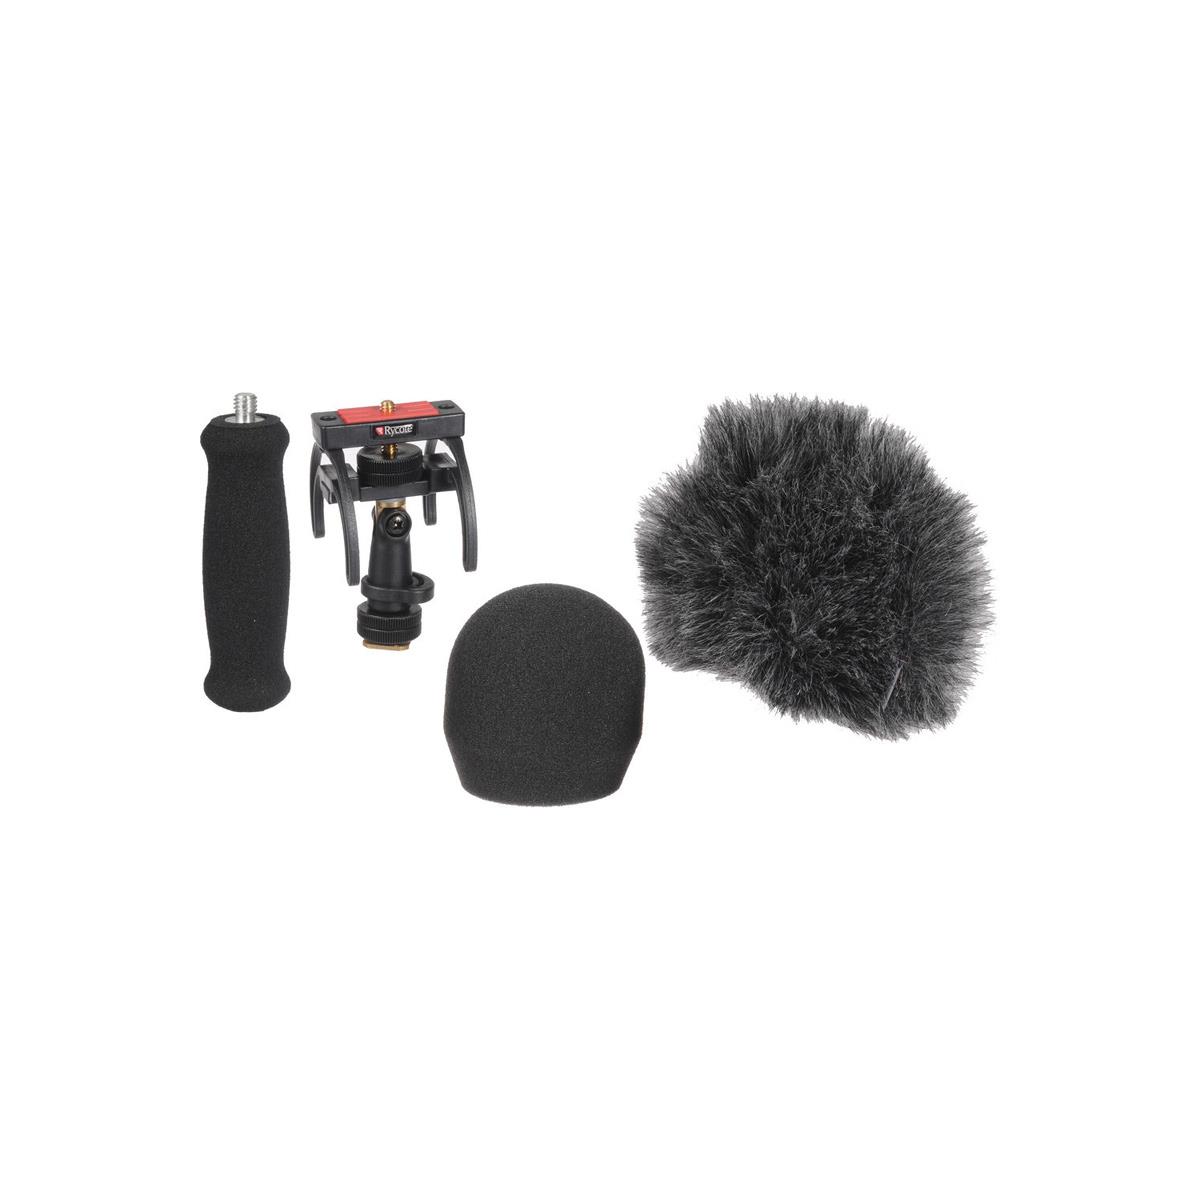 Image of Rycote Recorder Audio Kit for Zoom H2N Digital Recorder